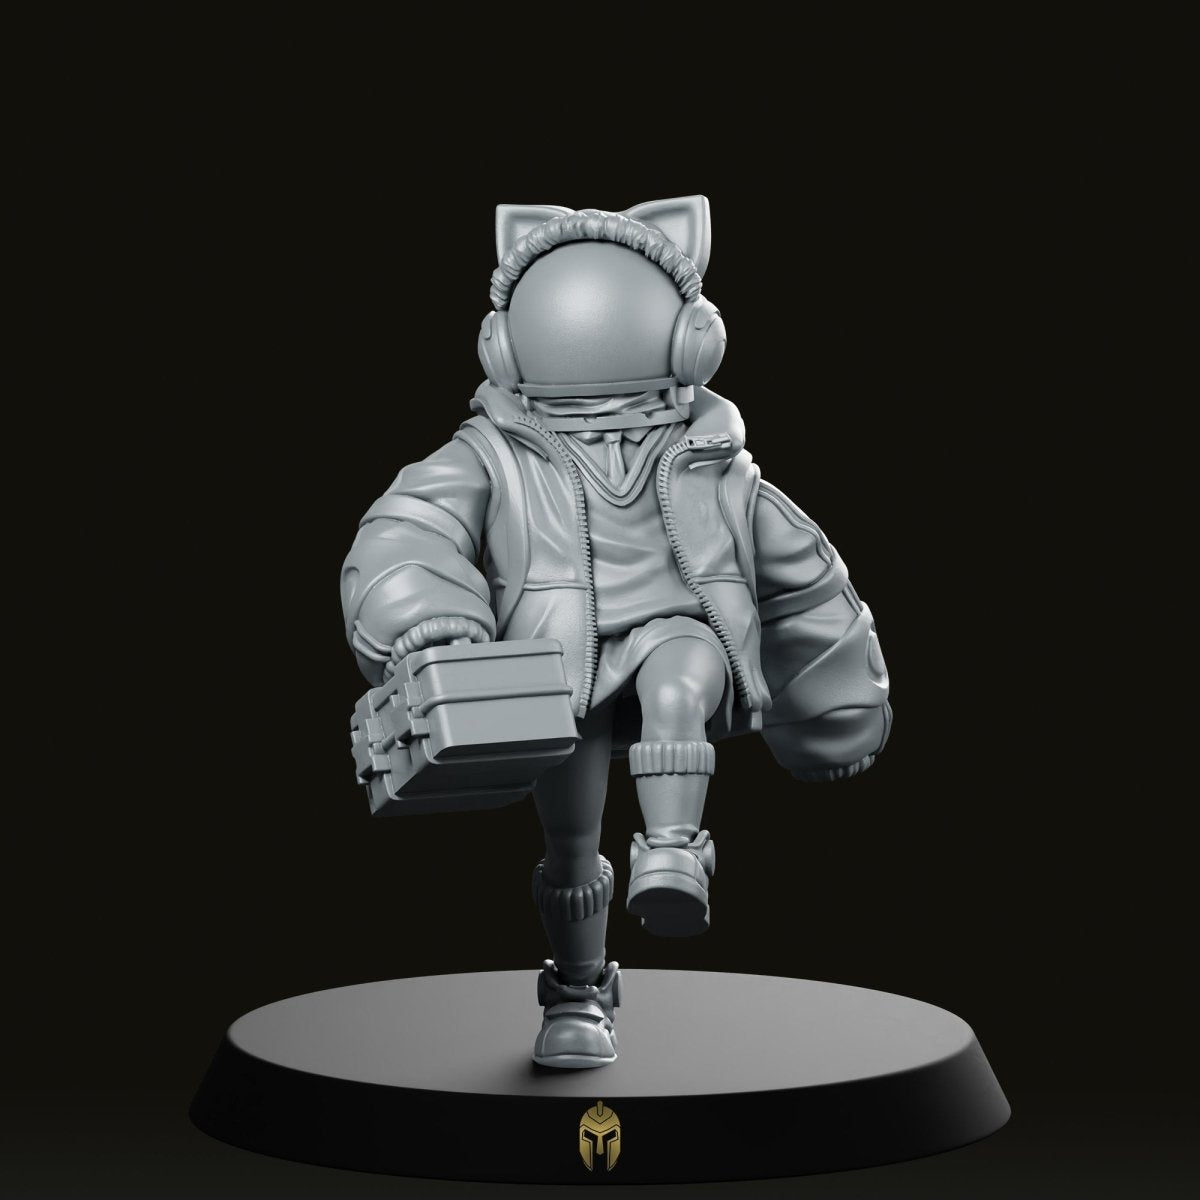 Delivery Gurl Itsy Pitsy Cyberpunk Miniature - We Print Miniatures